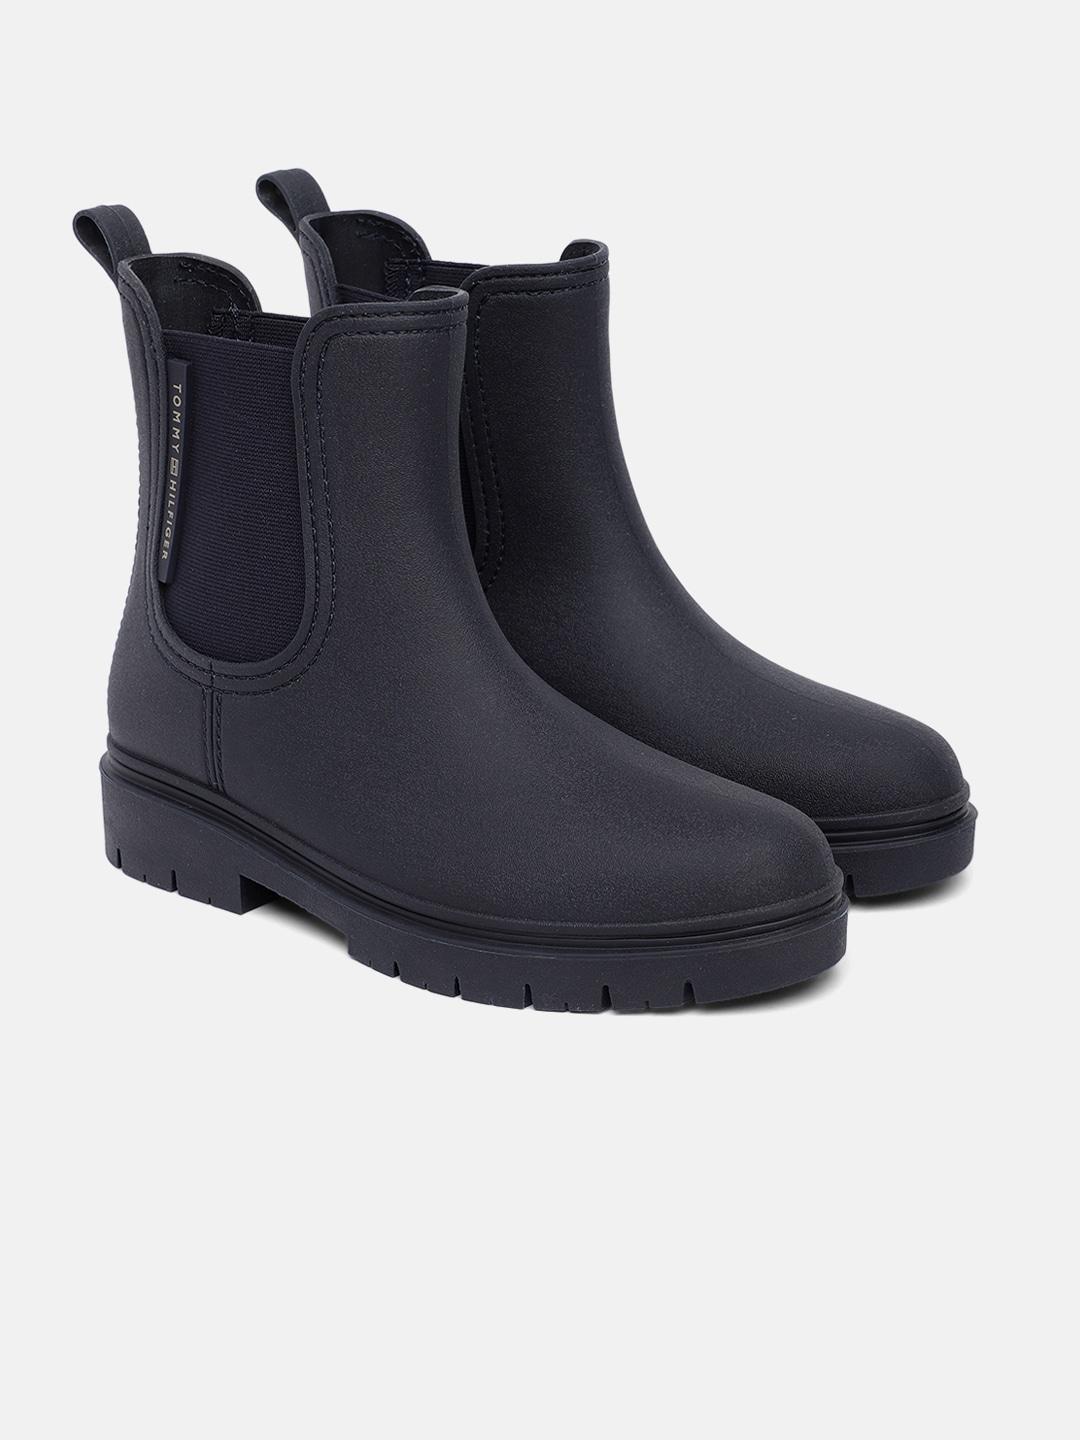 tommy-hilfiger-women-essential-solid-high-top-rain-boots